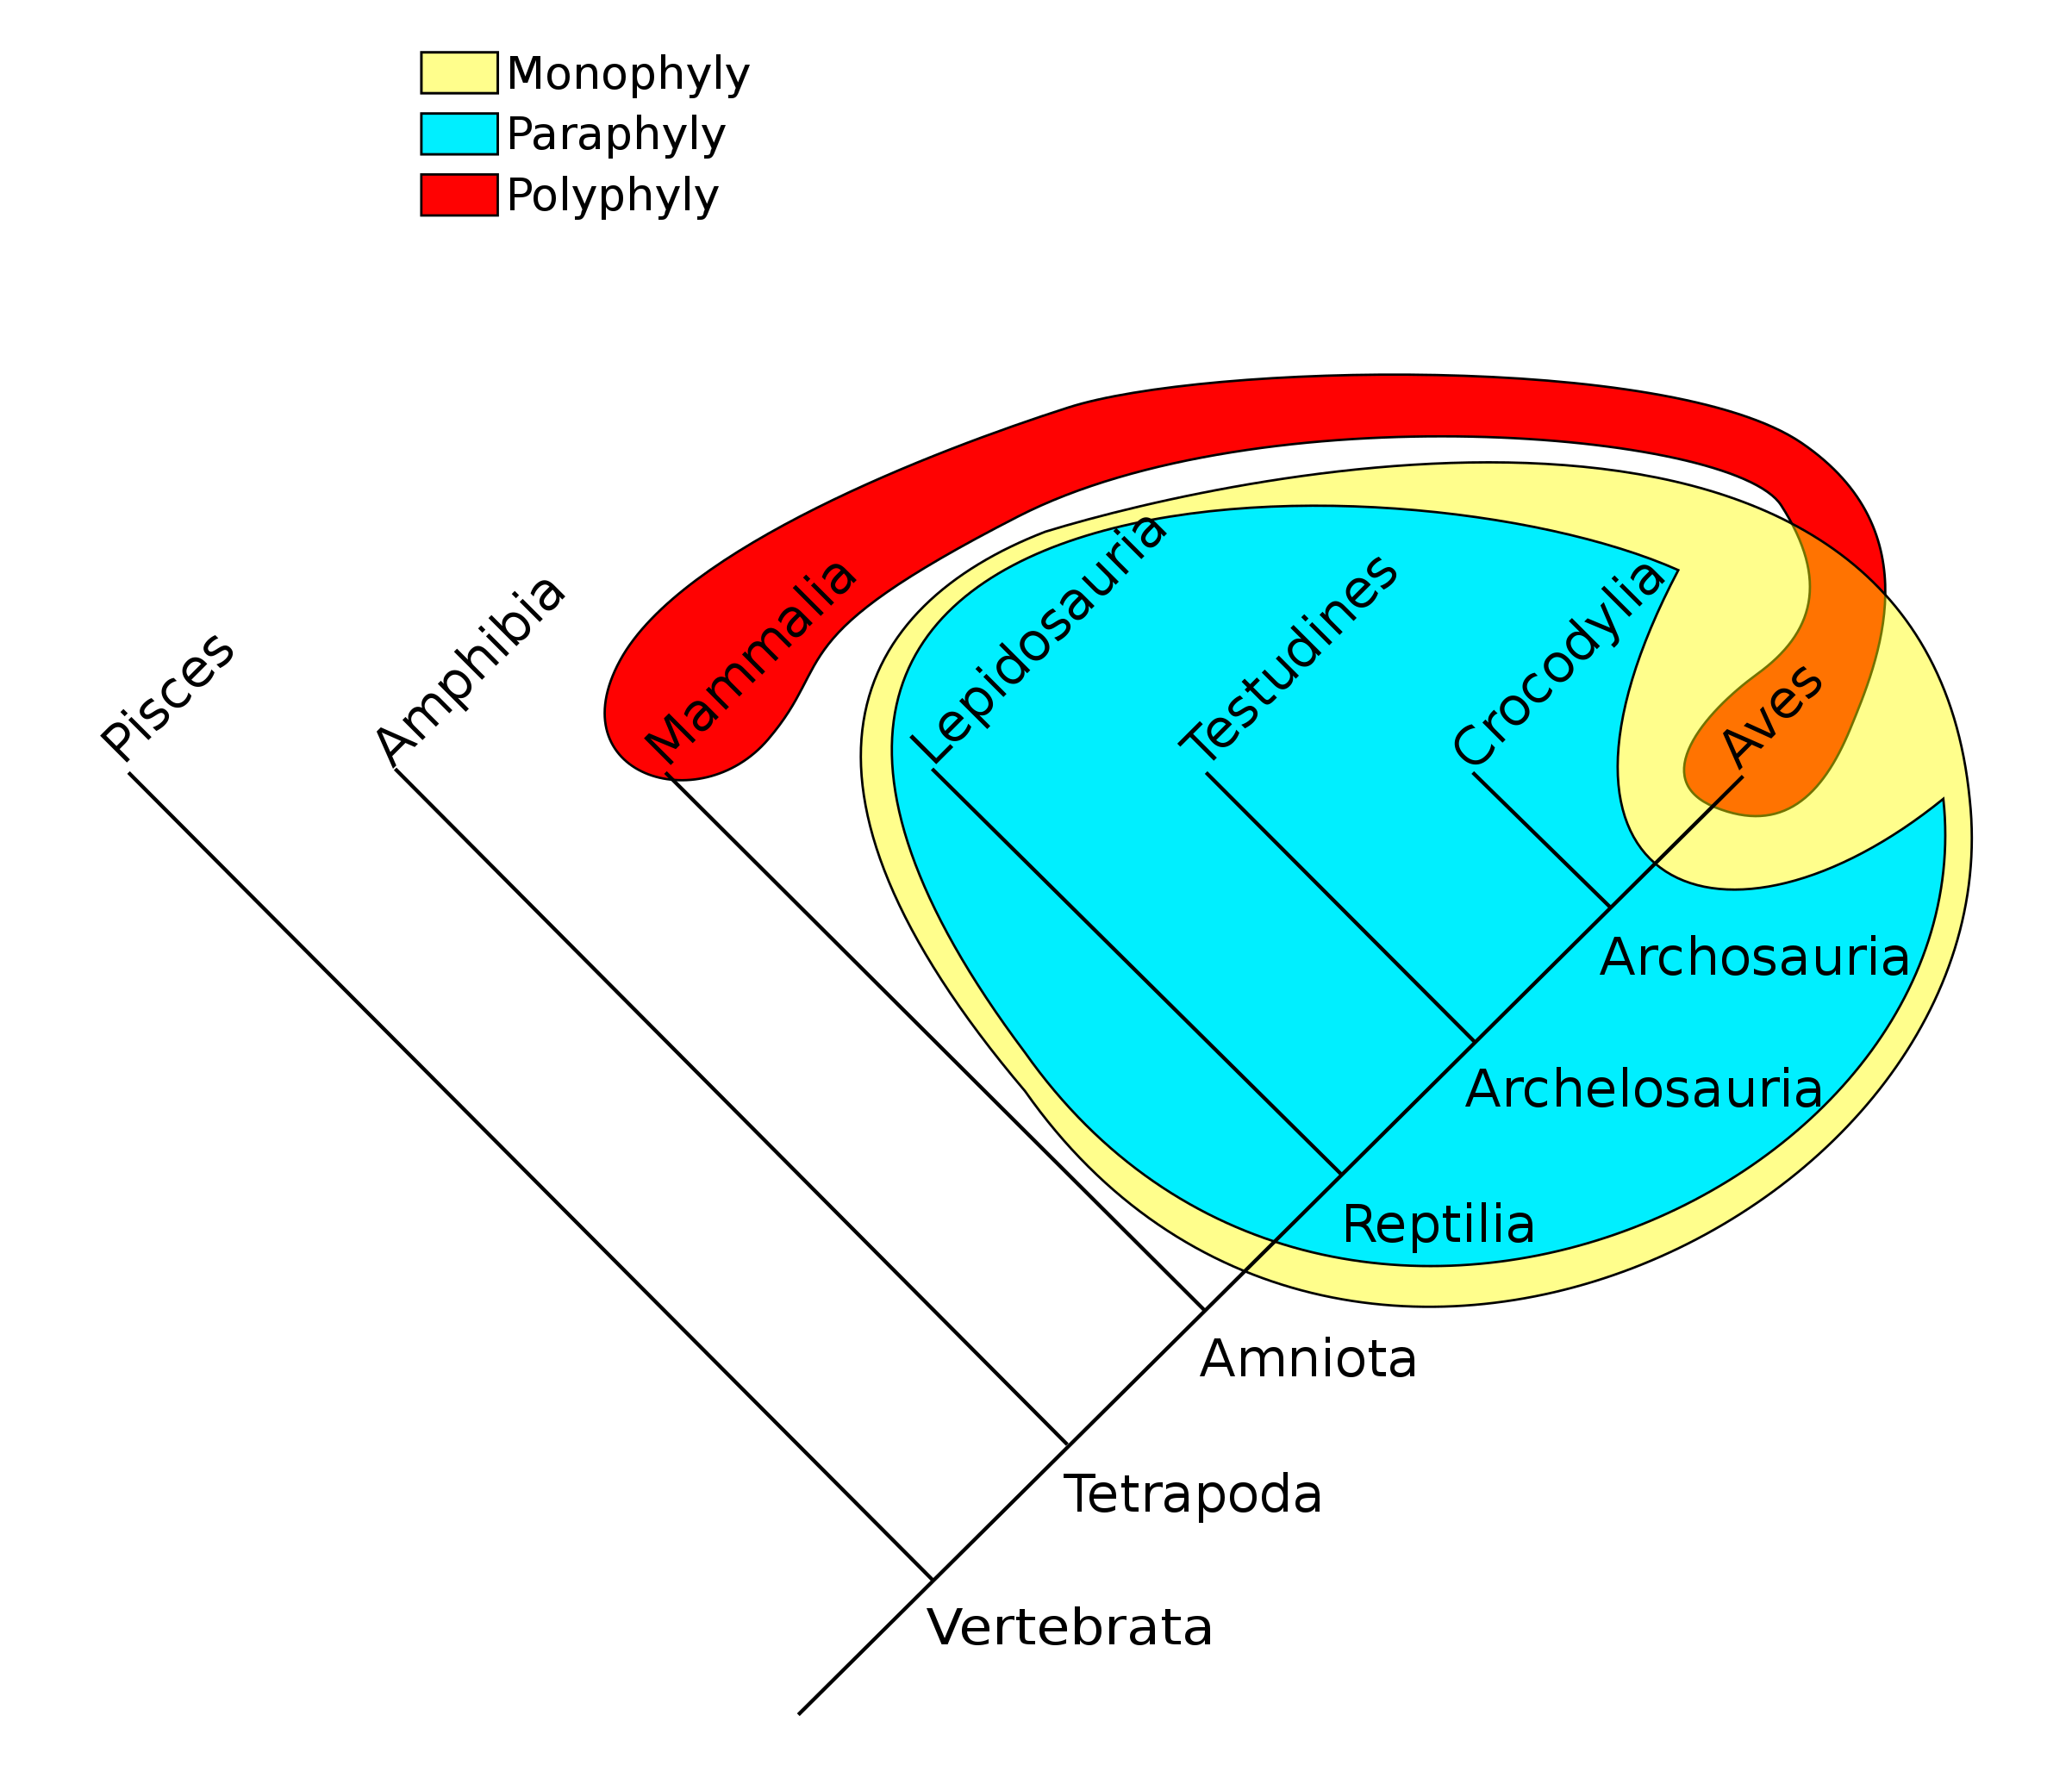 Monophyly(Yellow) - Testudines, Lepidosauria, Crocodylia, Aves, Reptilia, Diapsida, and Archosauria. Paraphyly(Teal) - Testudines, Lepidosauria, Crocodylia, Reptilia, Diapsida, and Archosauria. Polyphyly(Red) - Mammalia and Aves This tree is in a V shape with a root at the point in the V. Node Vertebrata begins at the point. The node branches up the left side of the V to node Pisces. Continuing up the right side at intervals are nodes Tertrapoda, Amniota, Reptilia, Diapsida, and finally Archosauria. Node Tetrapods branches to the left parallel to the left side of the V to node Amphibia. Node Amniota branches to the left to node Mammalia. Node Reptilia branches to the left to node Testudines. Node Diapsida branches to the left to node Lepidosauria. Node Archosauria branches to the left to node Crocodylia. Finally node Aves is at the point of the right side of the V.